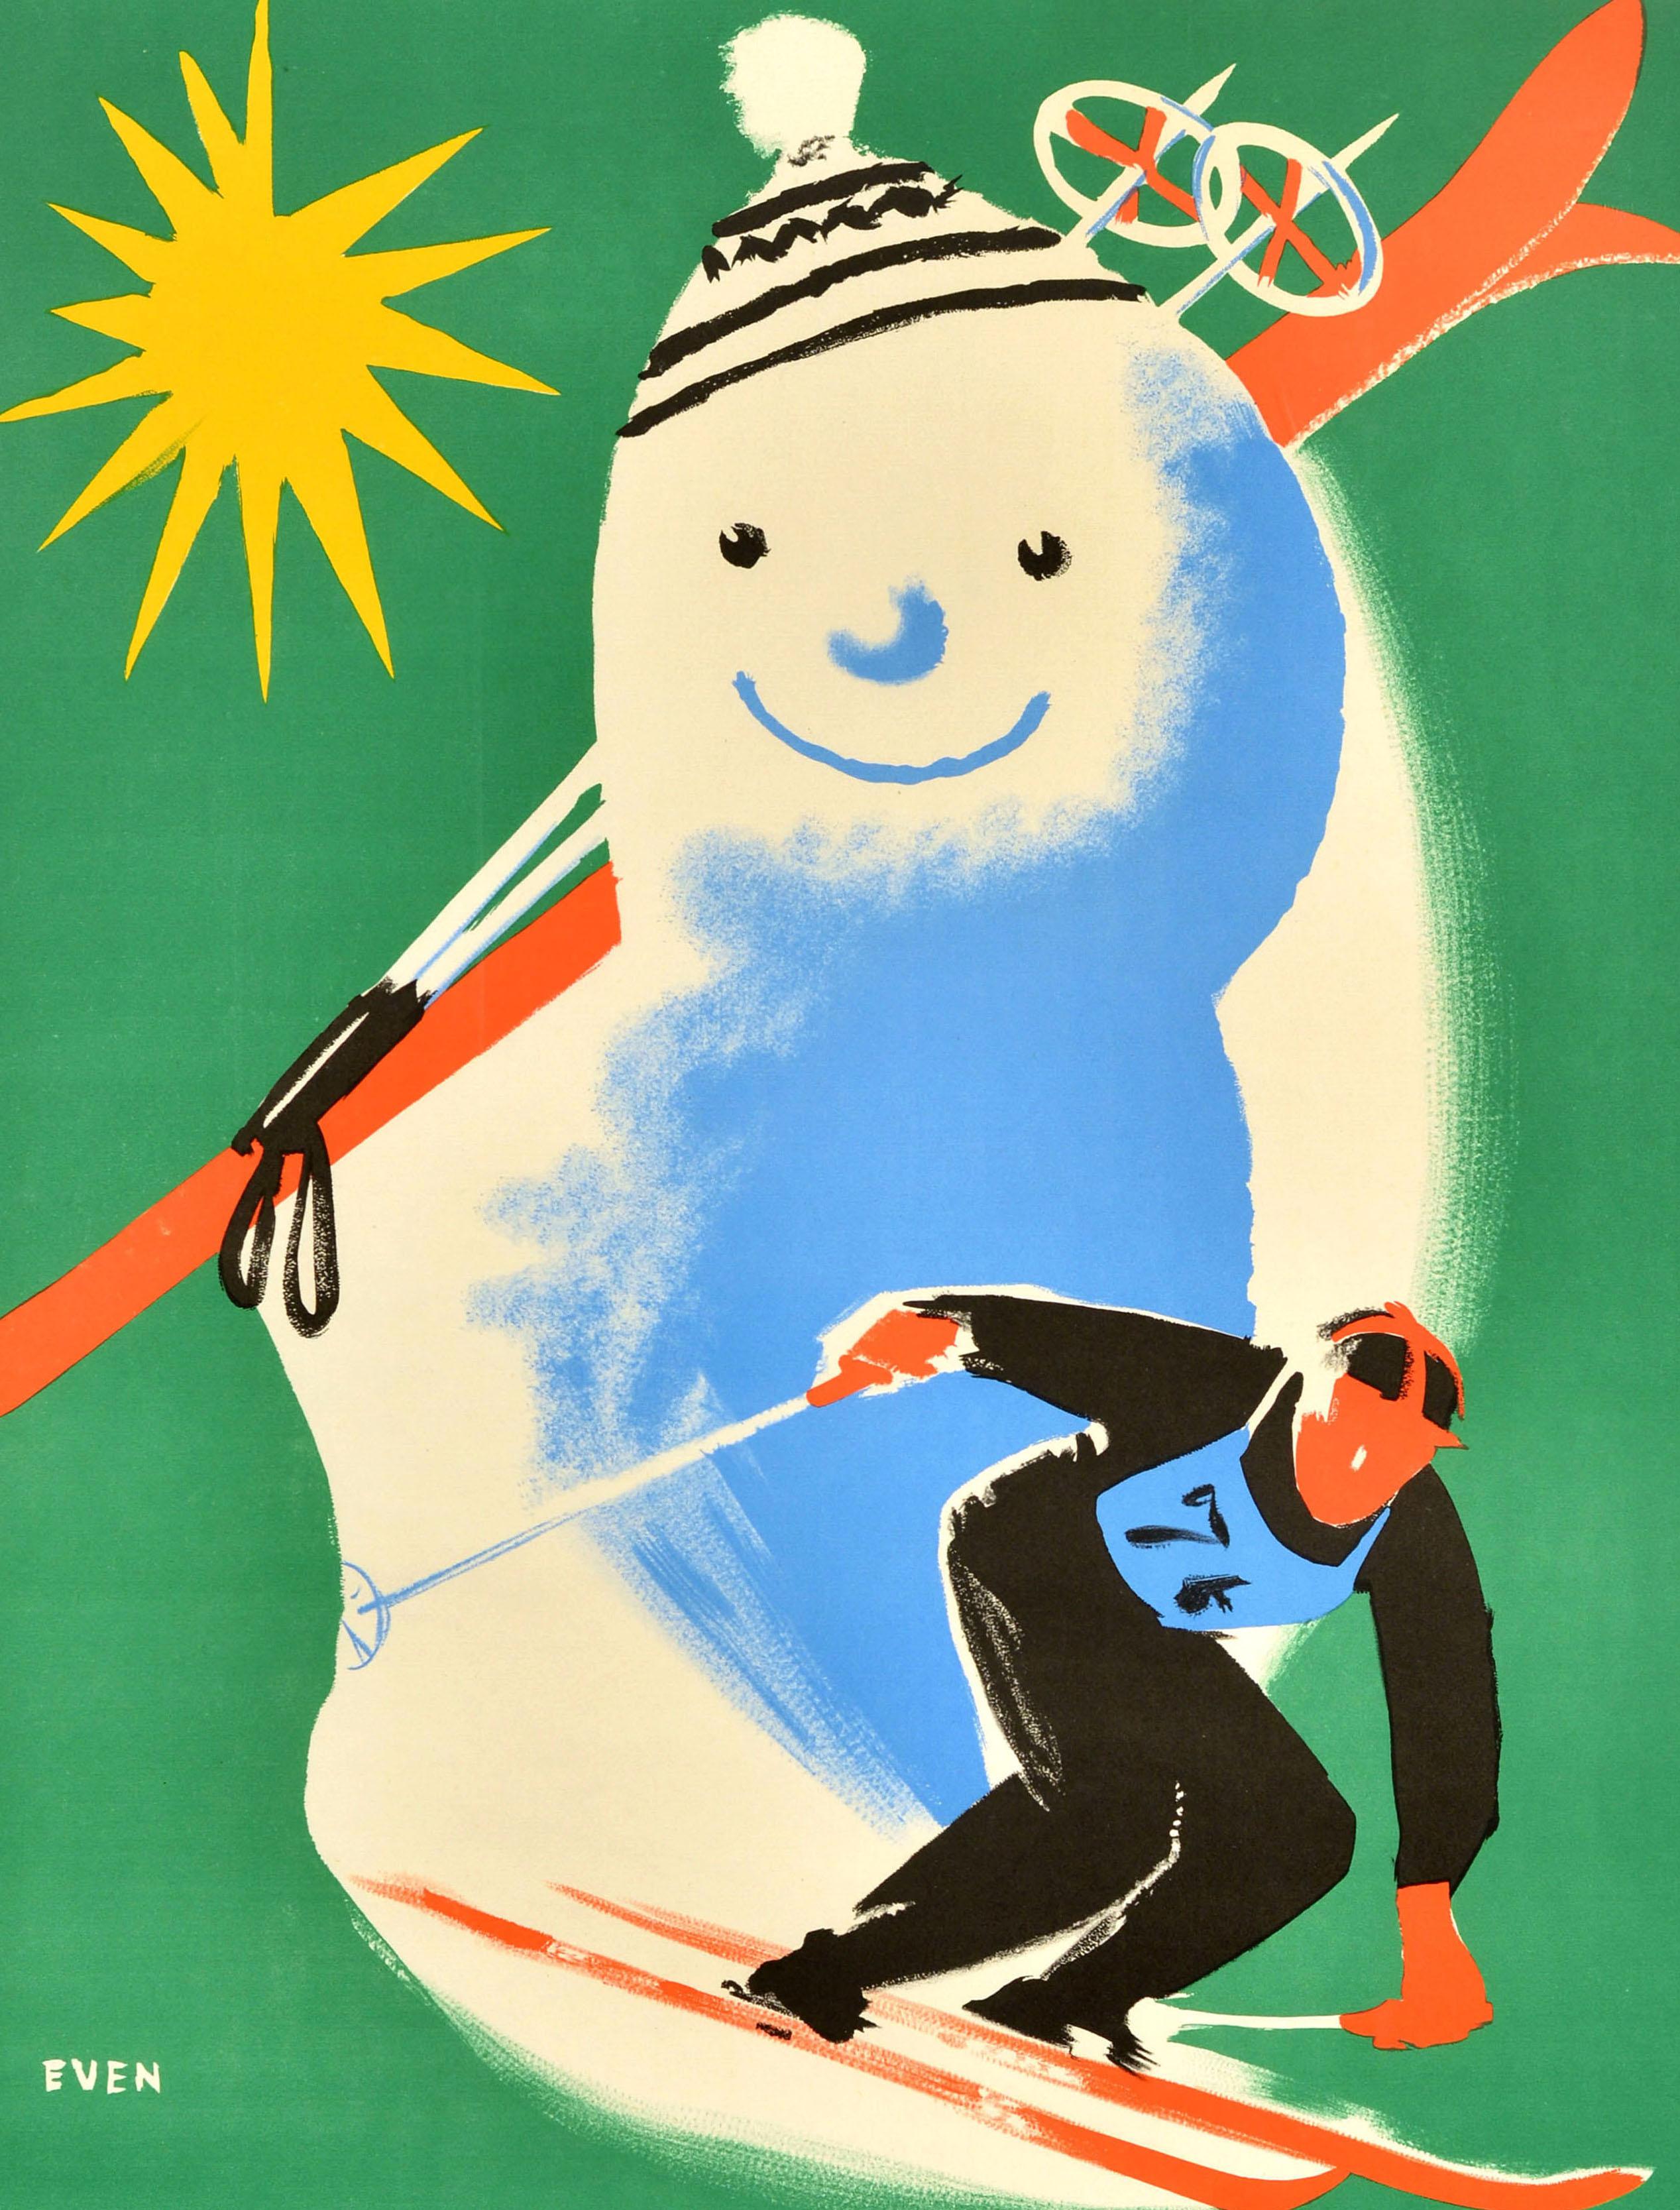 Original vintage ski travel poster for Le Mont Dore Auvergne in France featuring a fun design by Jean Even (1910-1986) depicting a skier wearing a racing bib skiing down a slope at speed with a smiling snowman wearing a bobble hat and holding skis